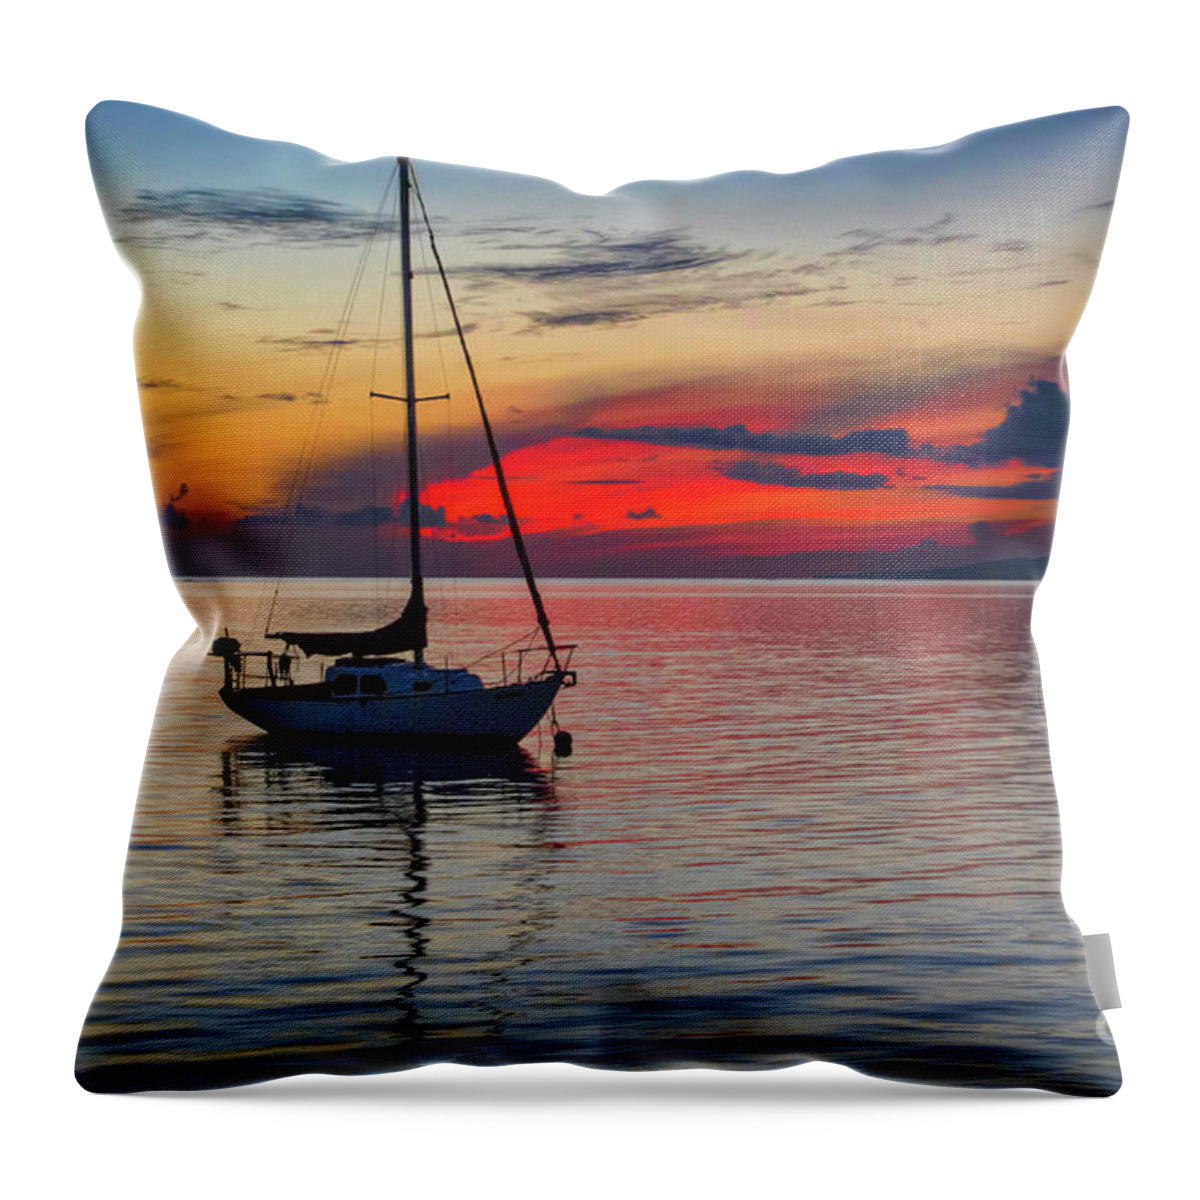 Twilight Fire Throw Pillow featuring the photograph Twilight Fire by Mitch Shindelbower